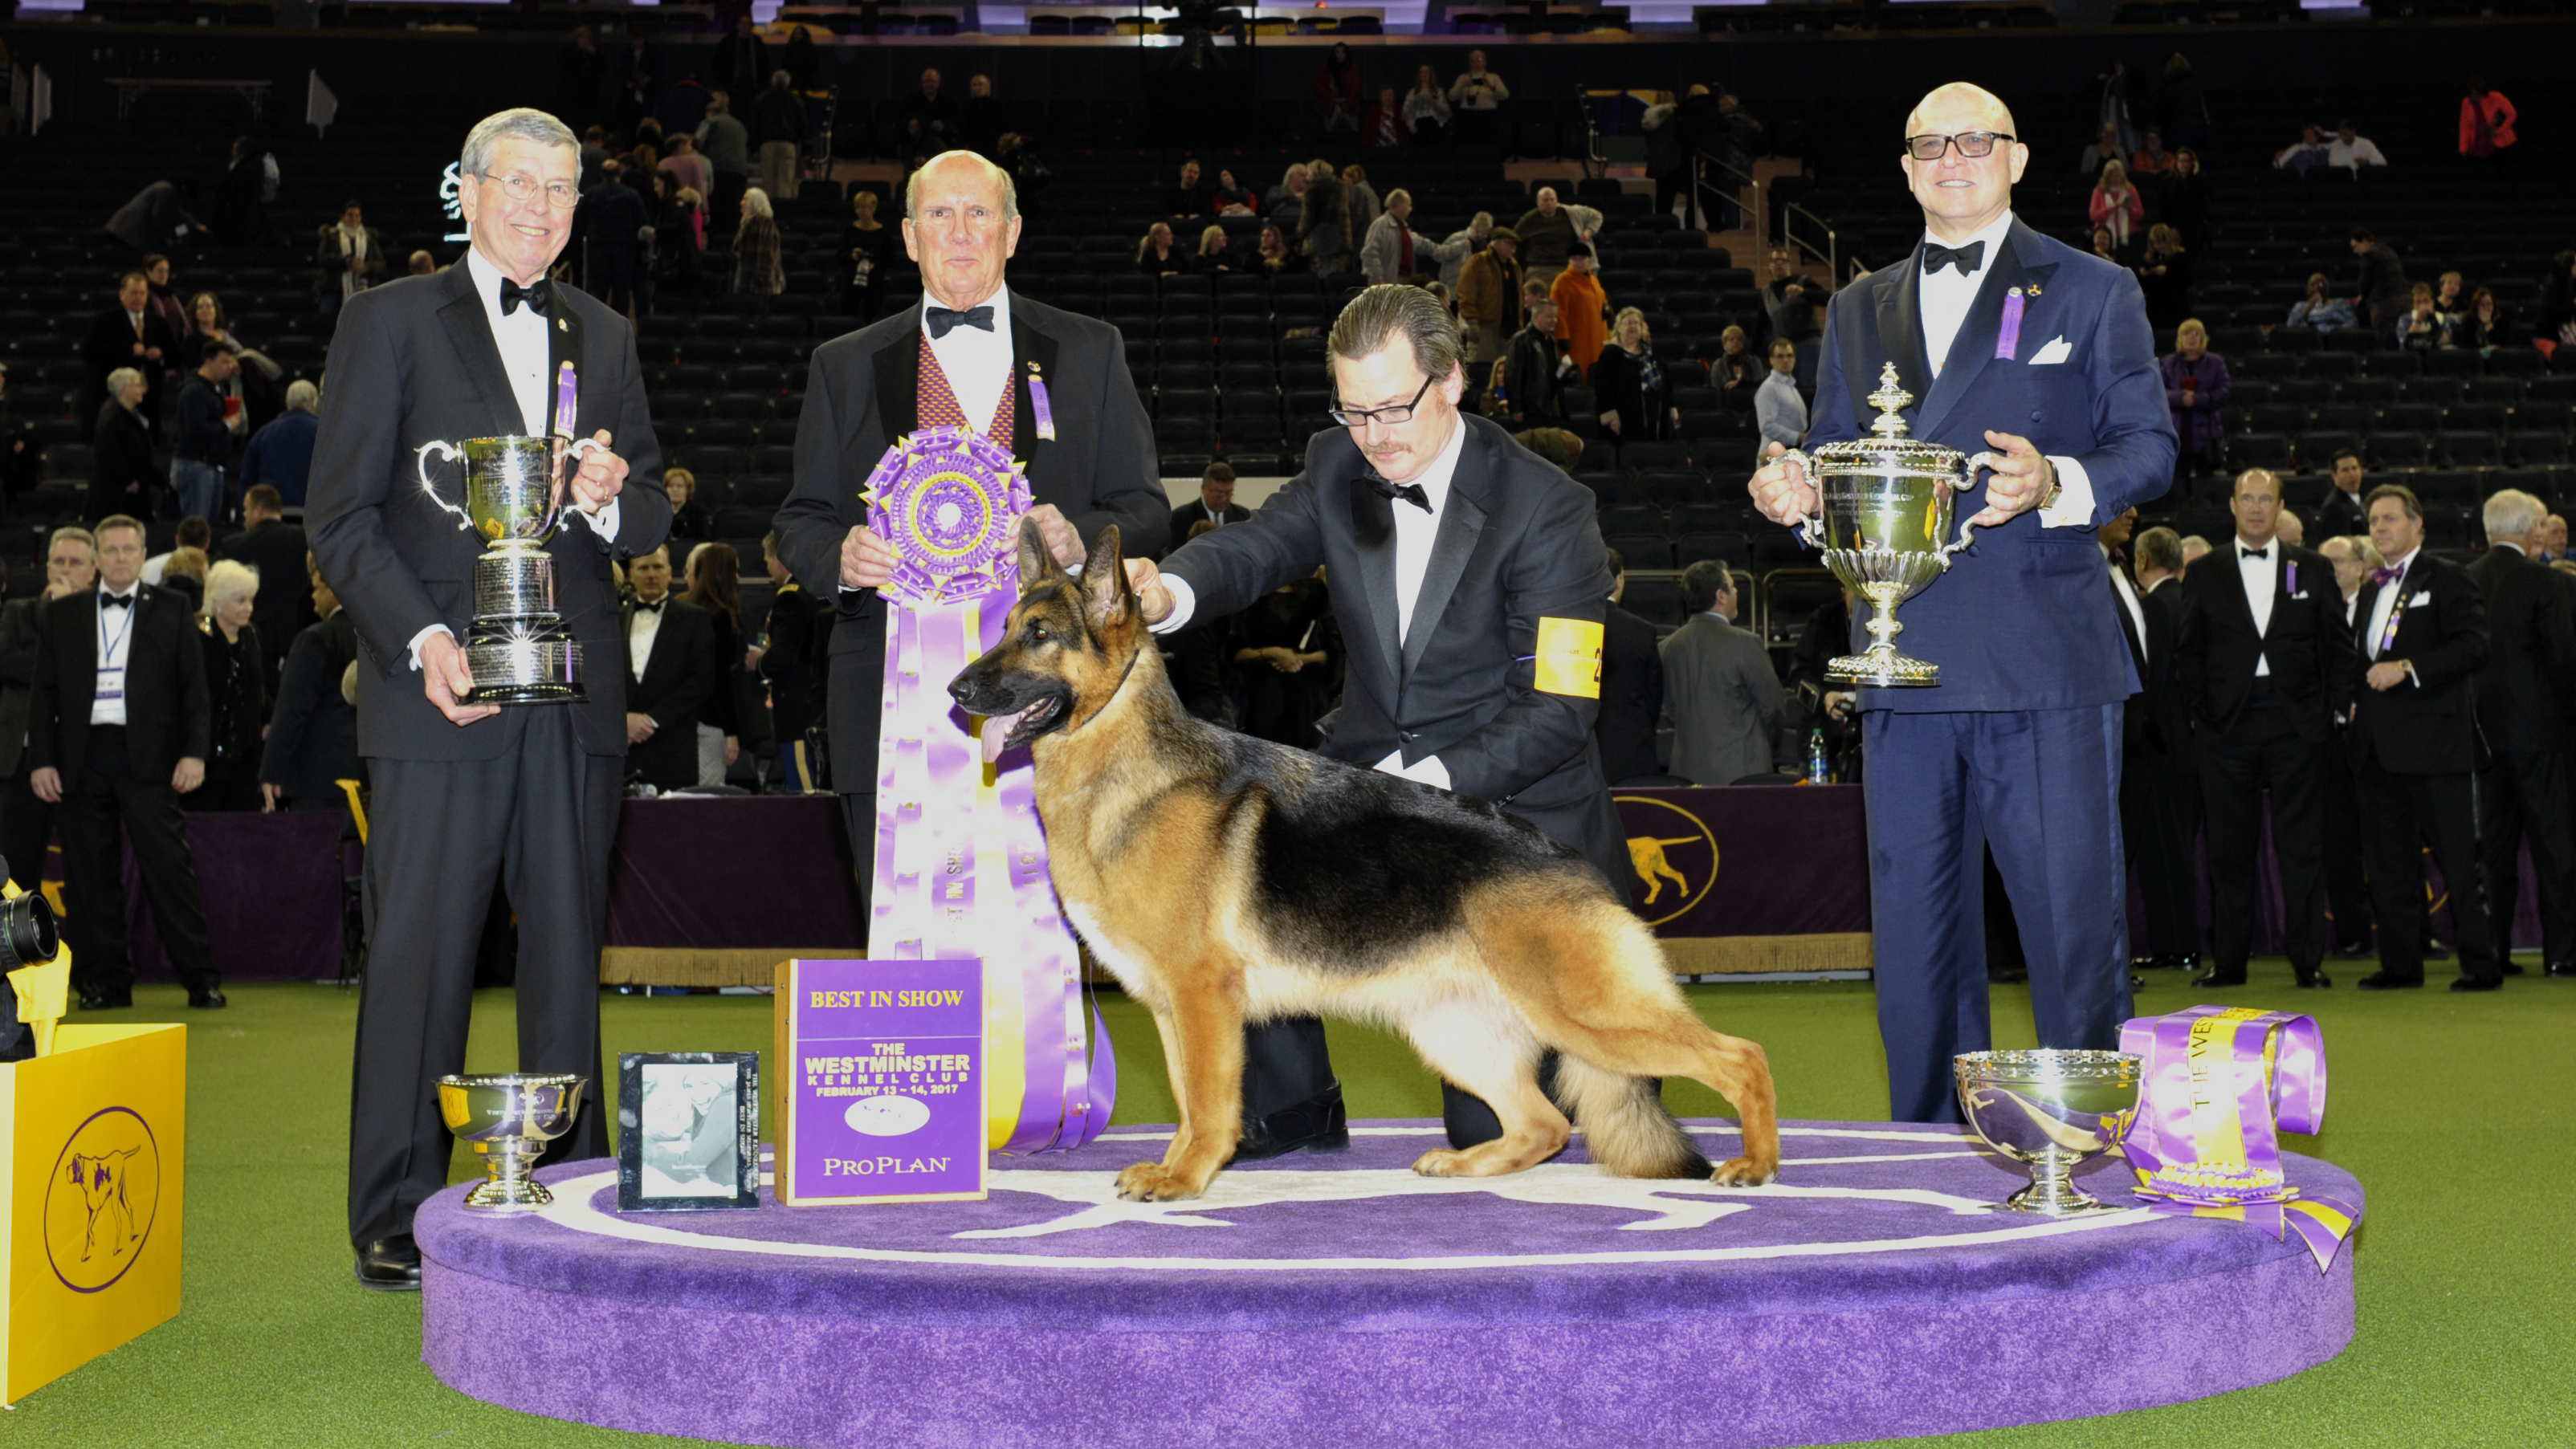 Show for the Westminster Kennel Club 